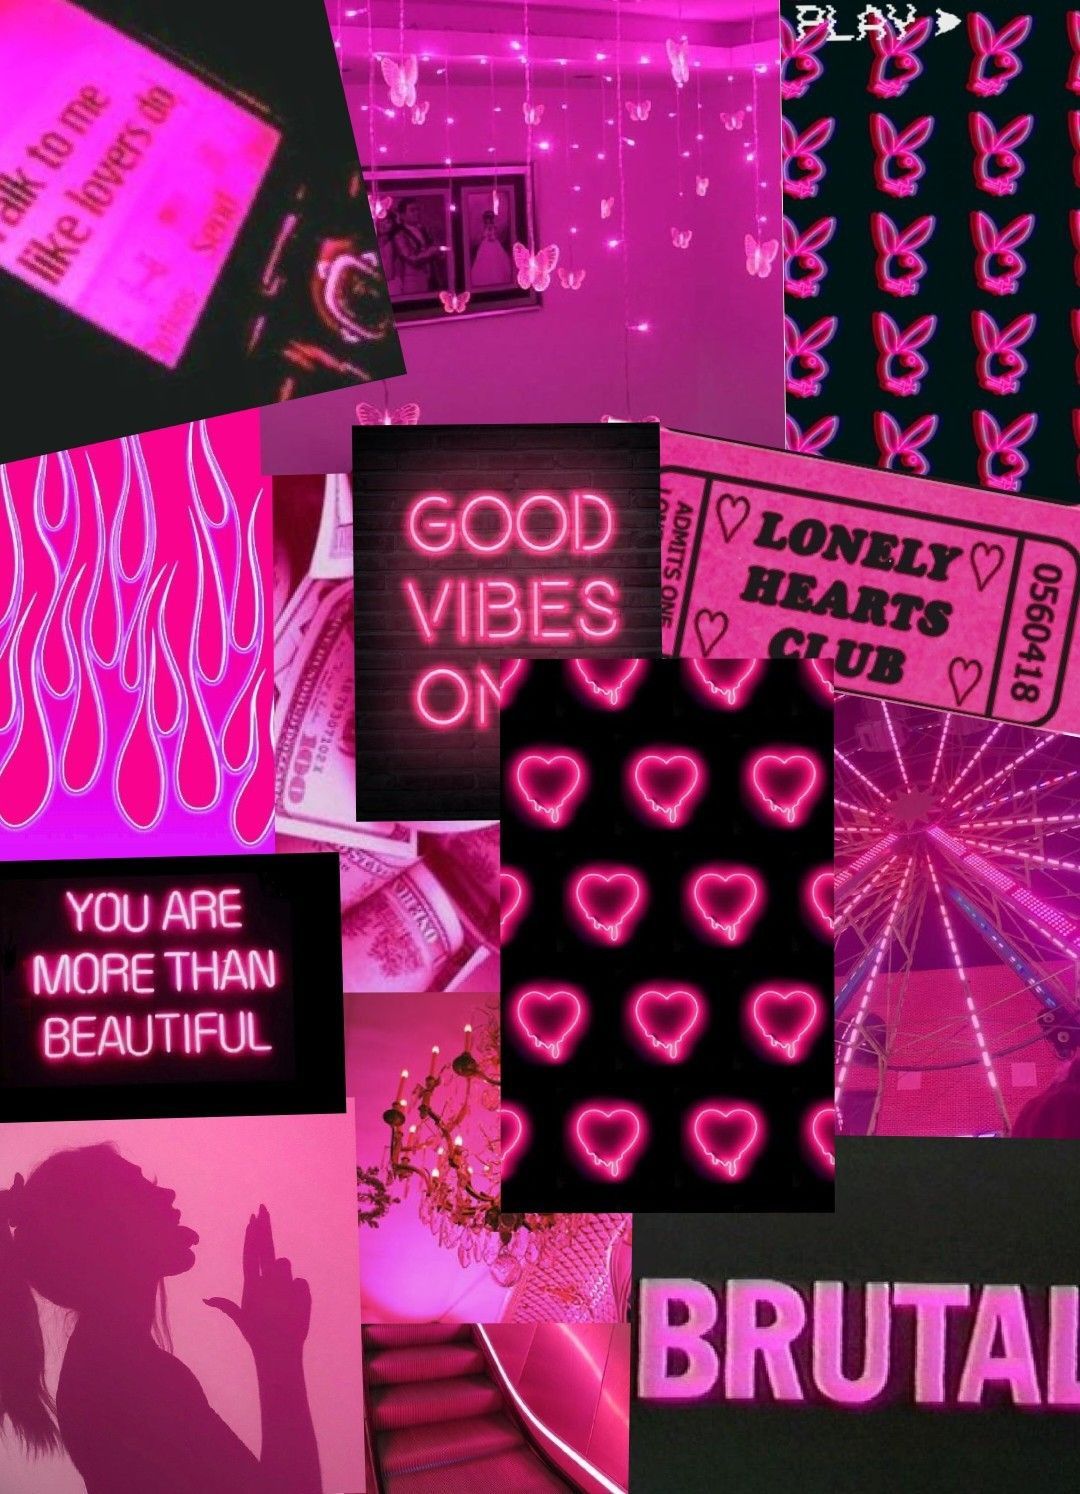 Aesthetic pink background with neon signs and images - Neon pink, hot pink, pink collage